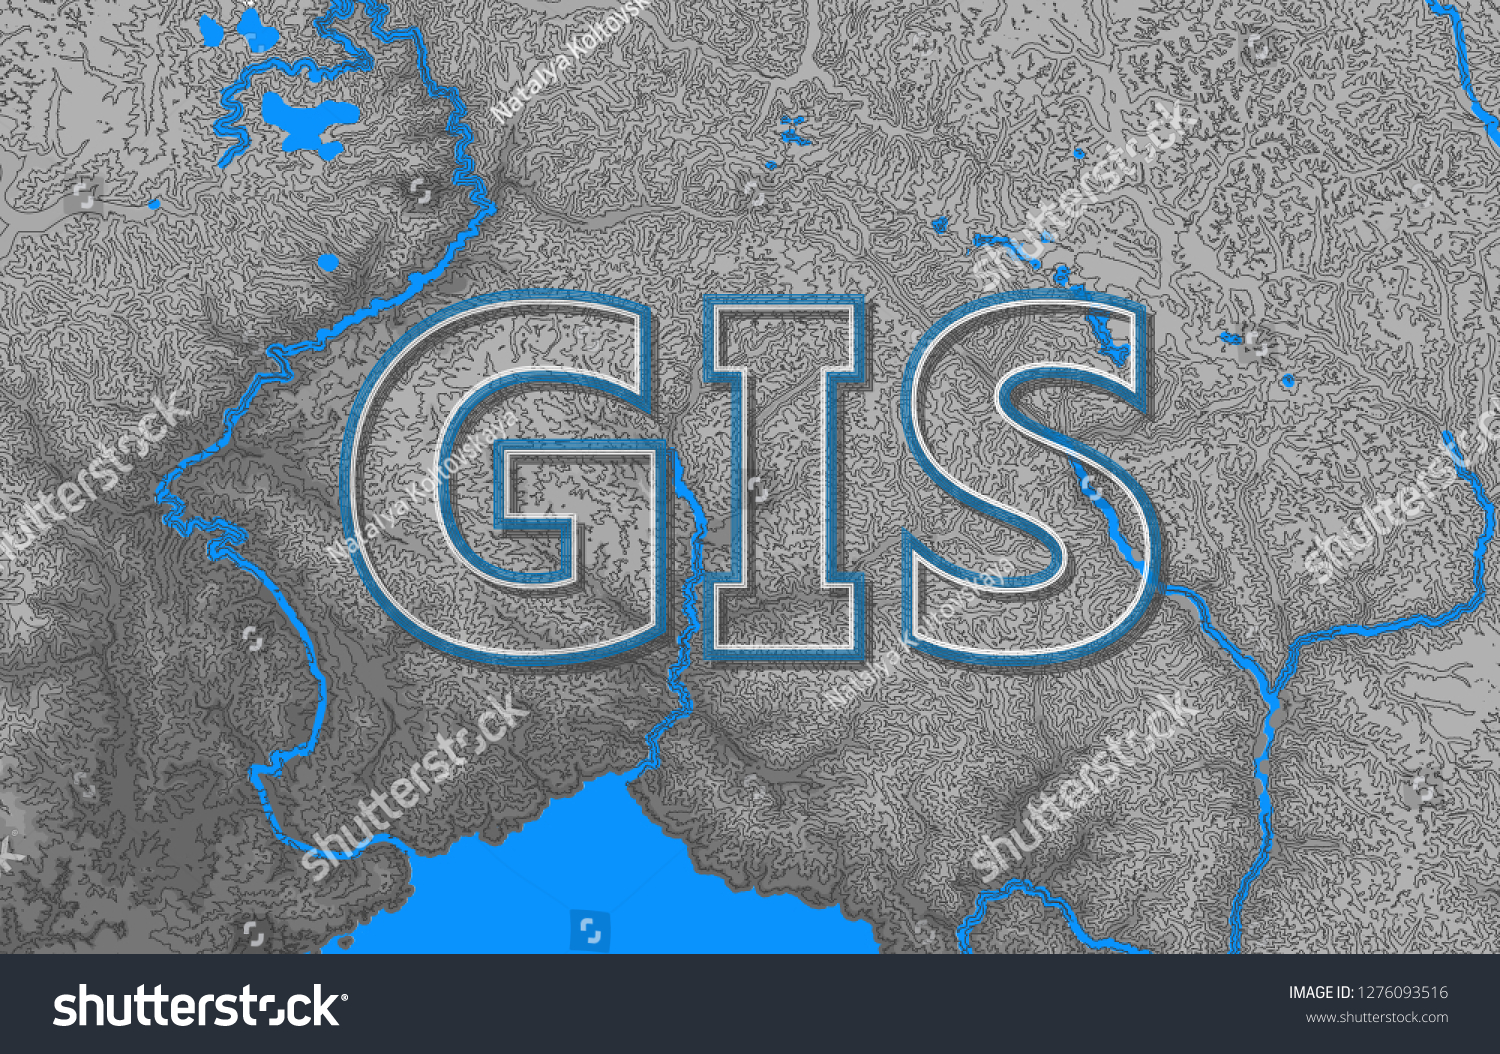 Geographic Information Systems Gis Cartography Mapping Stock Vector ...